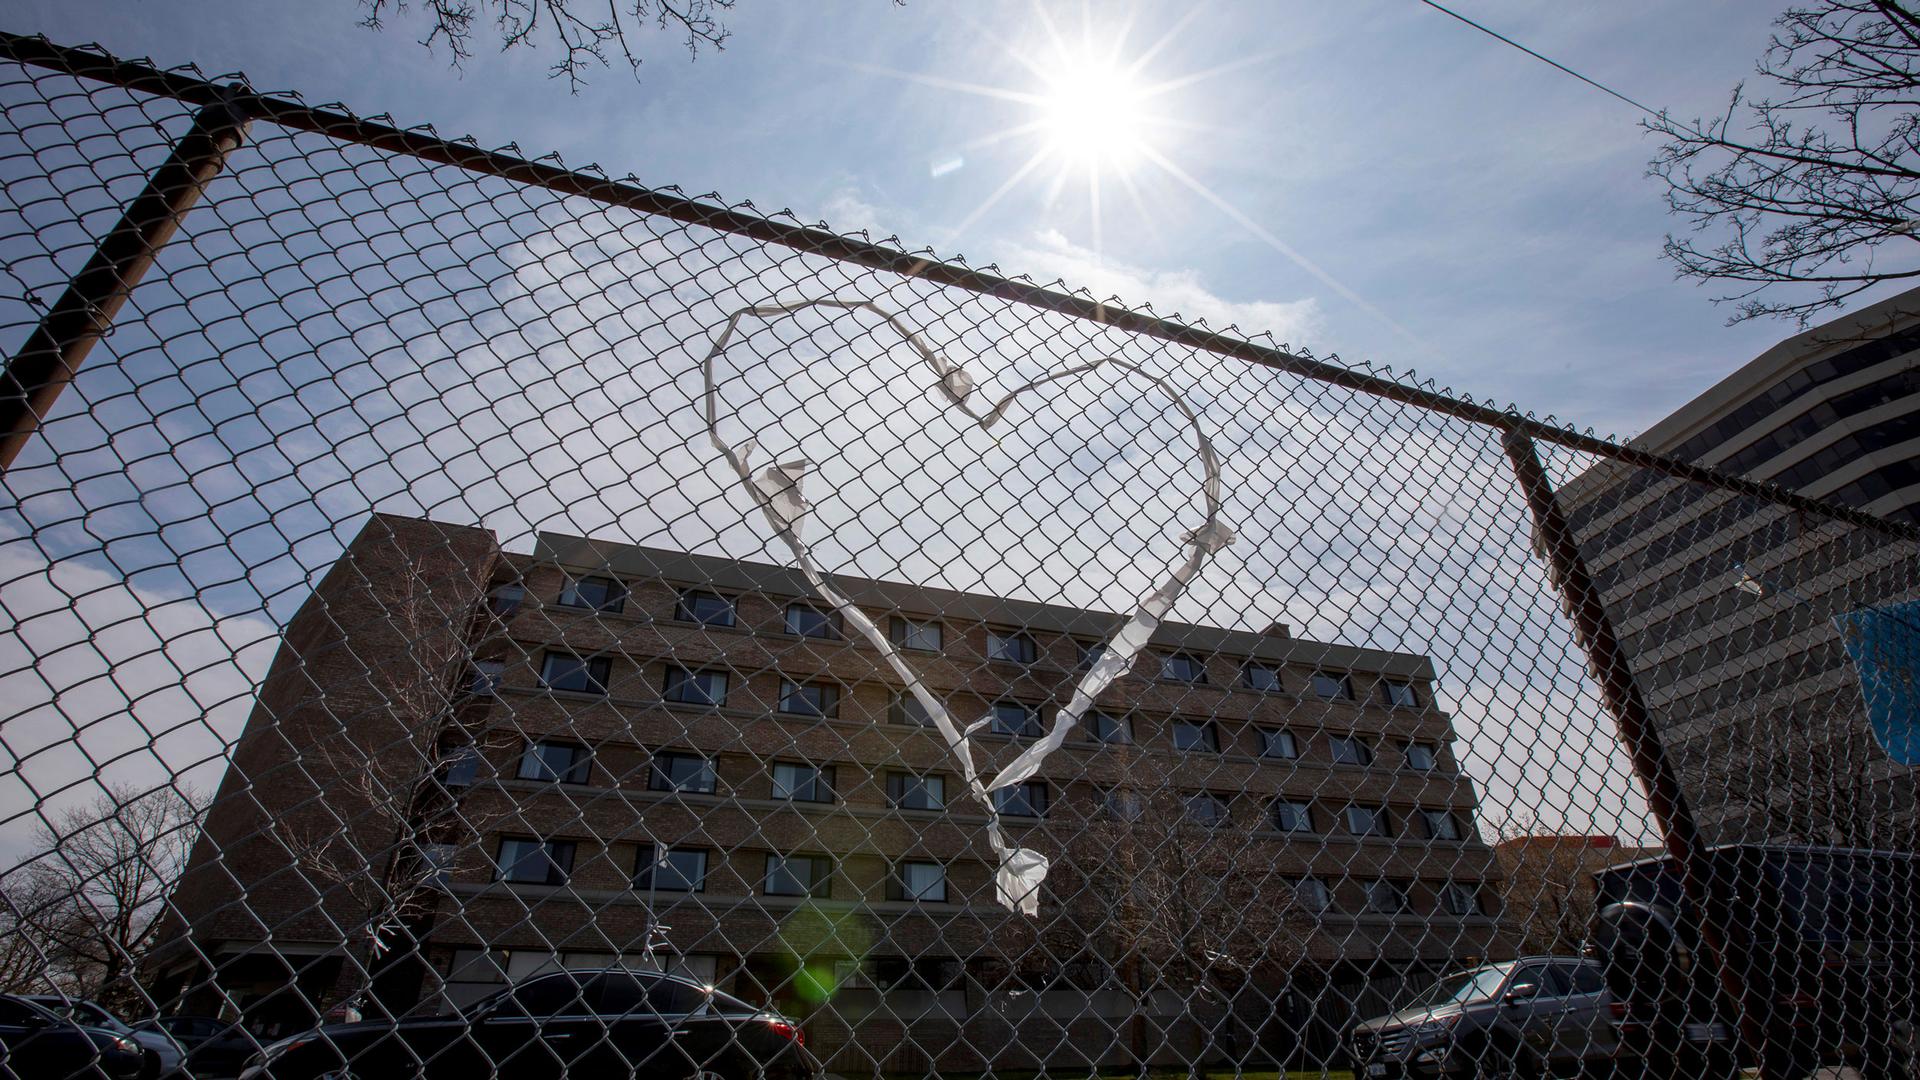 A chain-link fence is shown with a clothe heart woven into it and a brick building in the background.